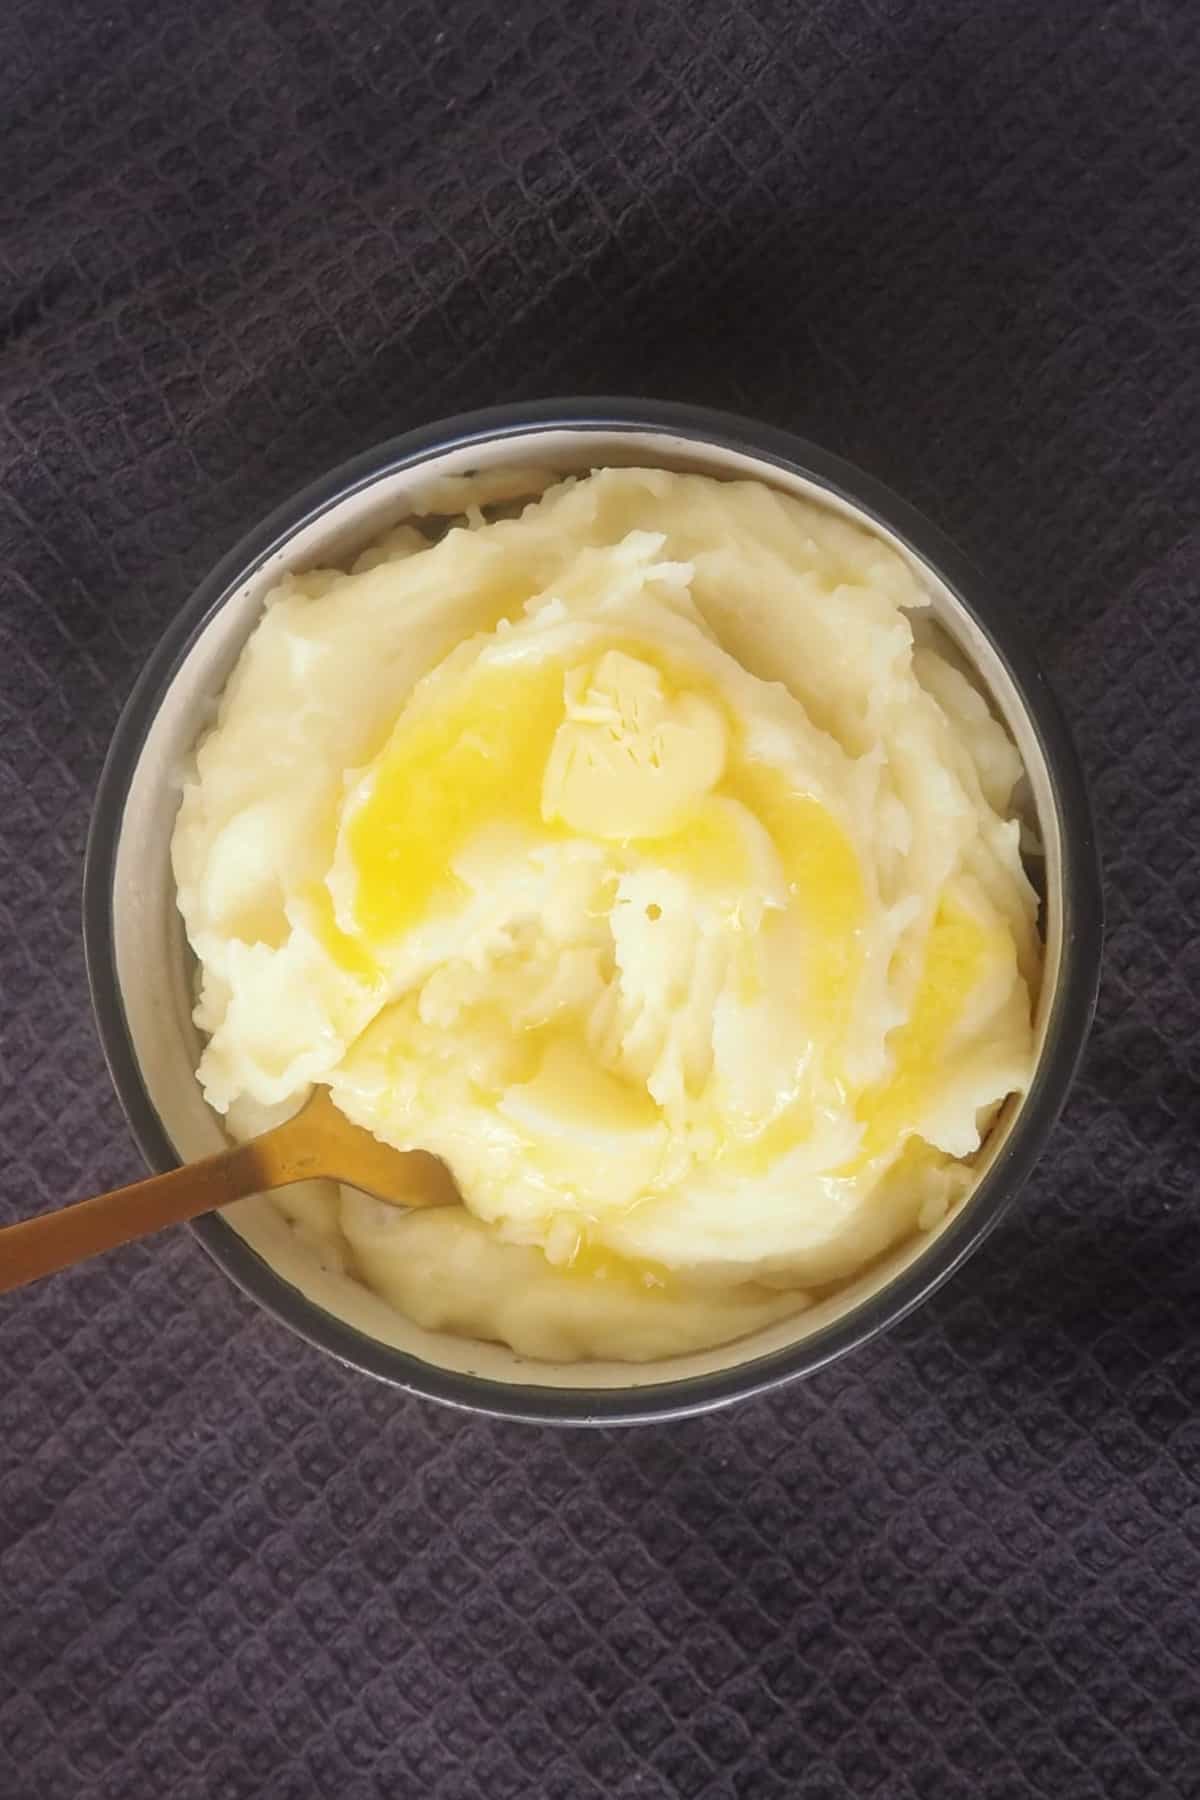 Overhead view of a bowl of mashed potatoes drizzled with butter. There is a gold fork sitting in the potato.